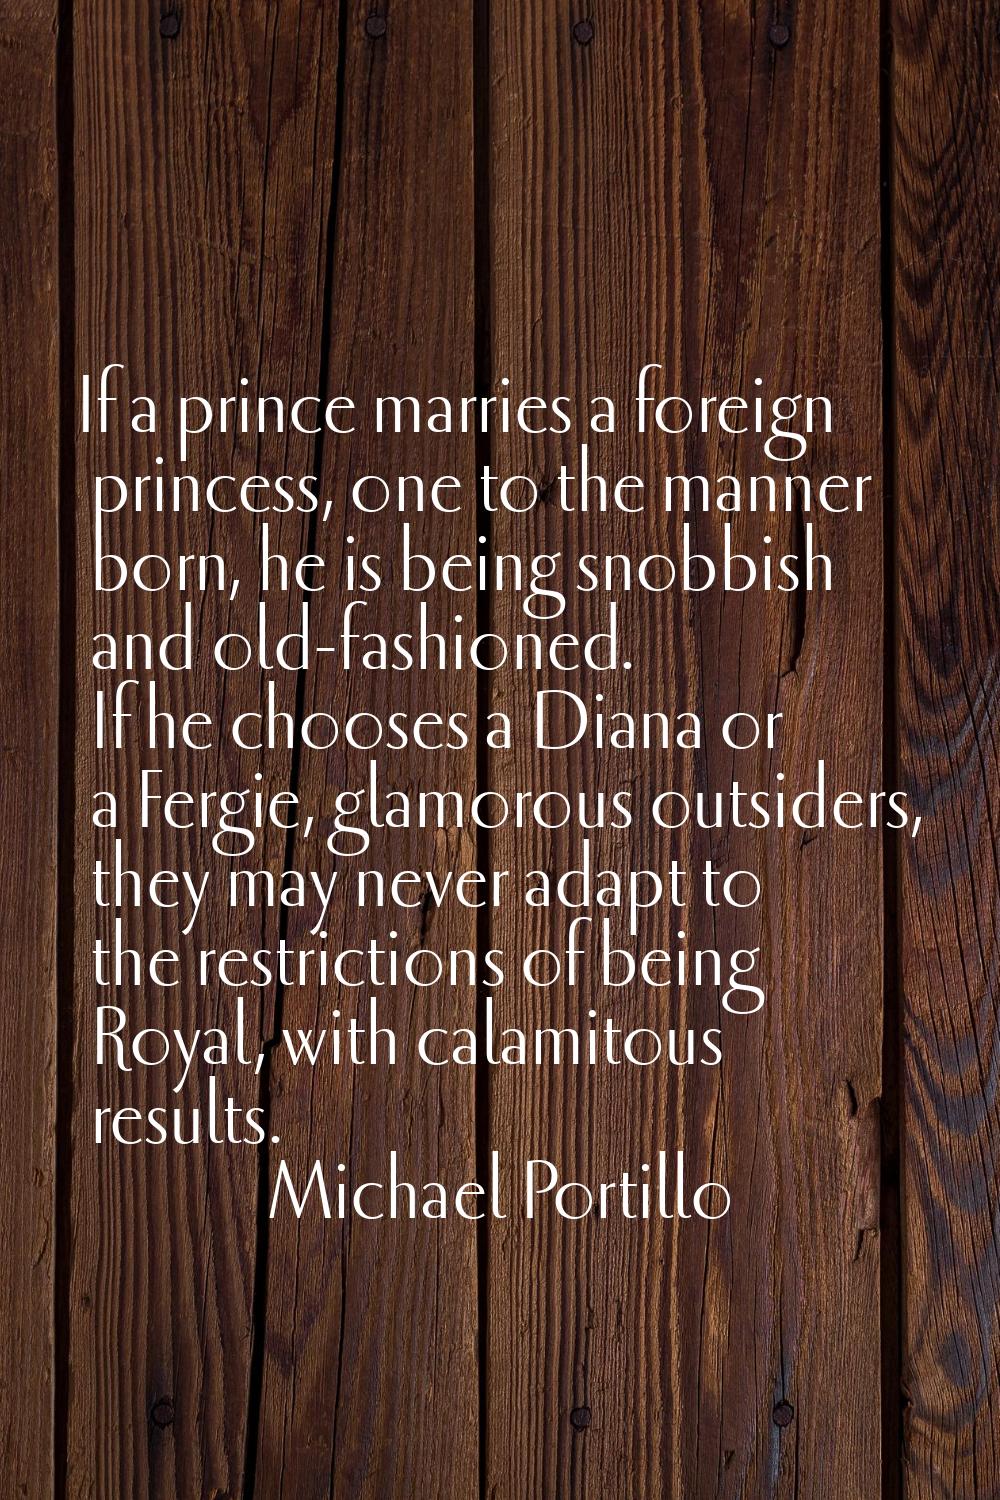 If a prince marries a foreign princess, one to the manner born, he is being snobbish and old-fashio